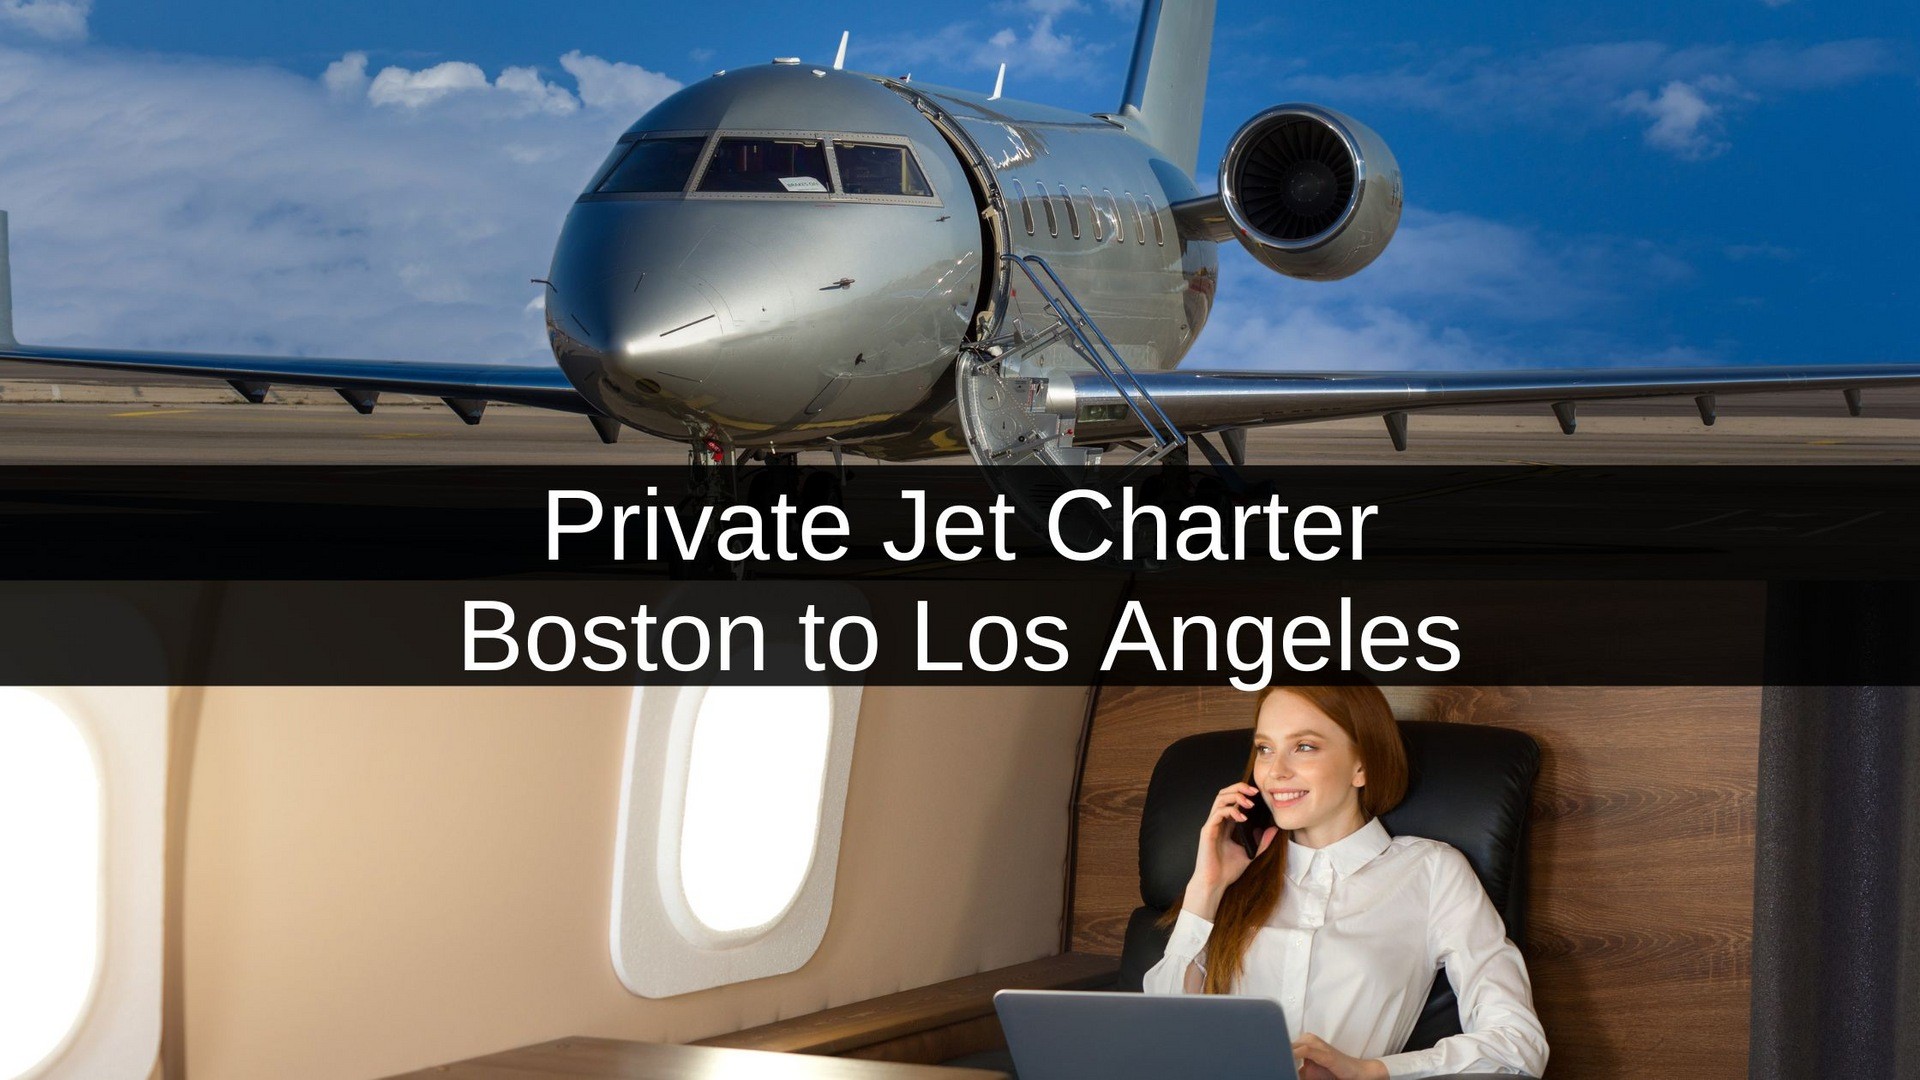 Private Jet Charter from Boston to Los Angeles